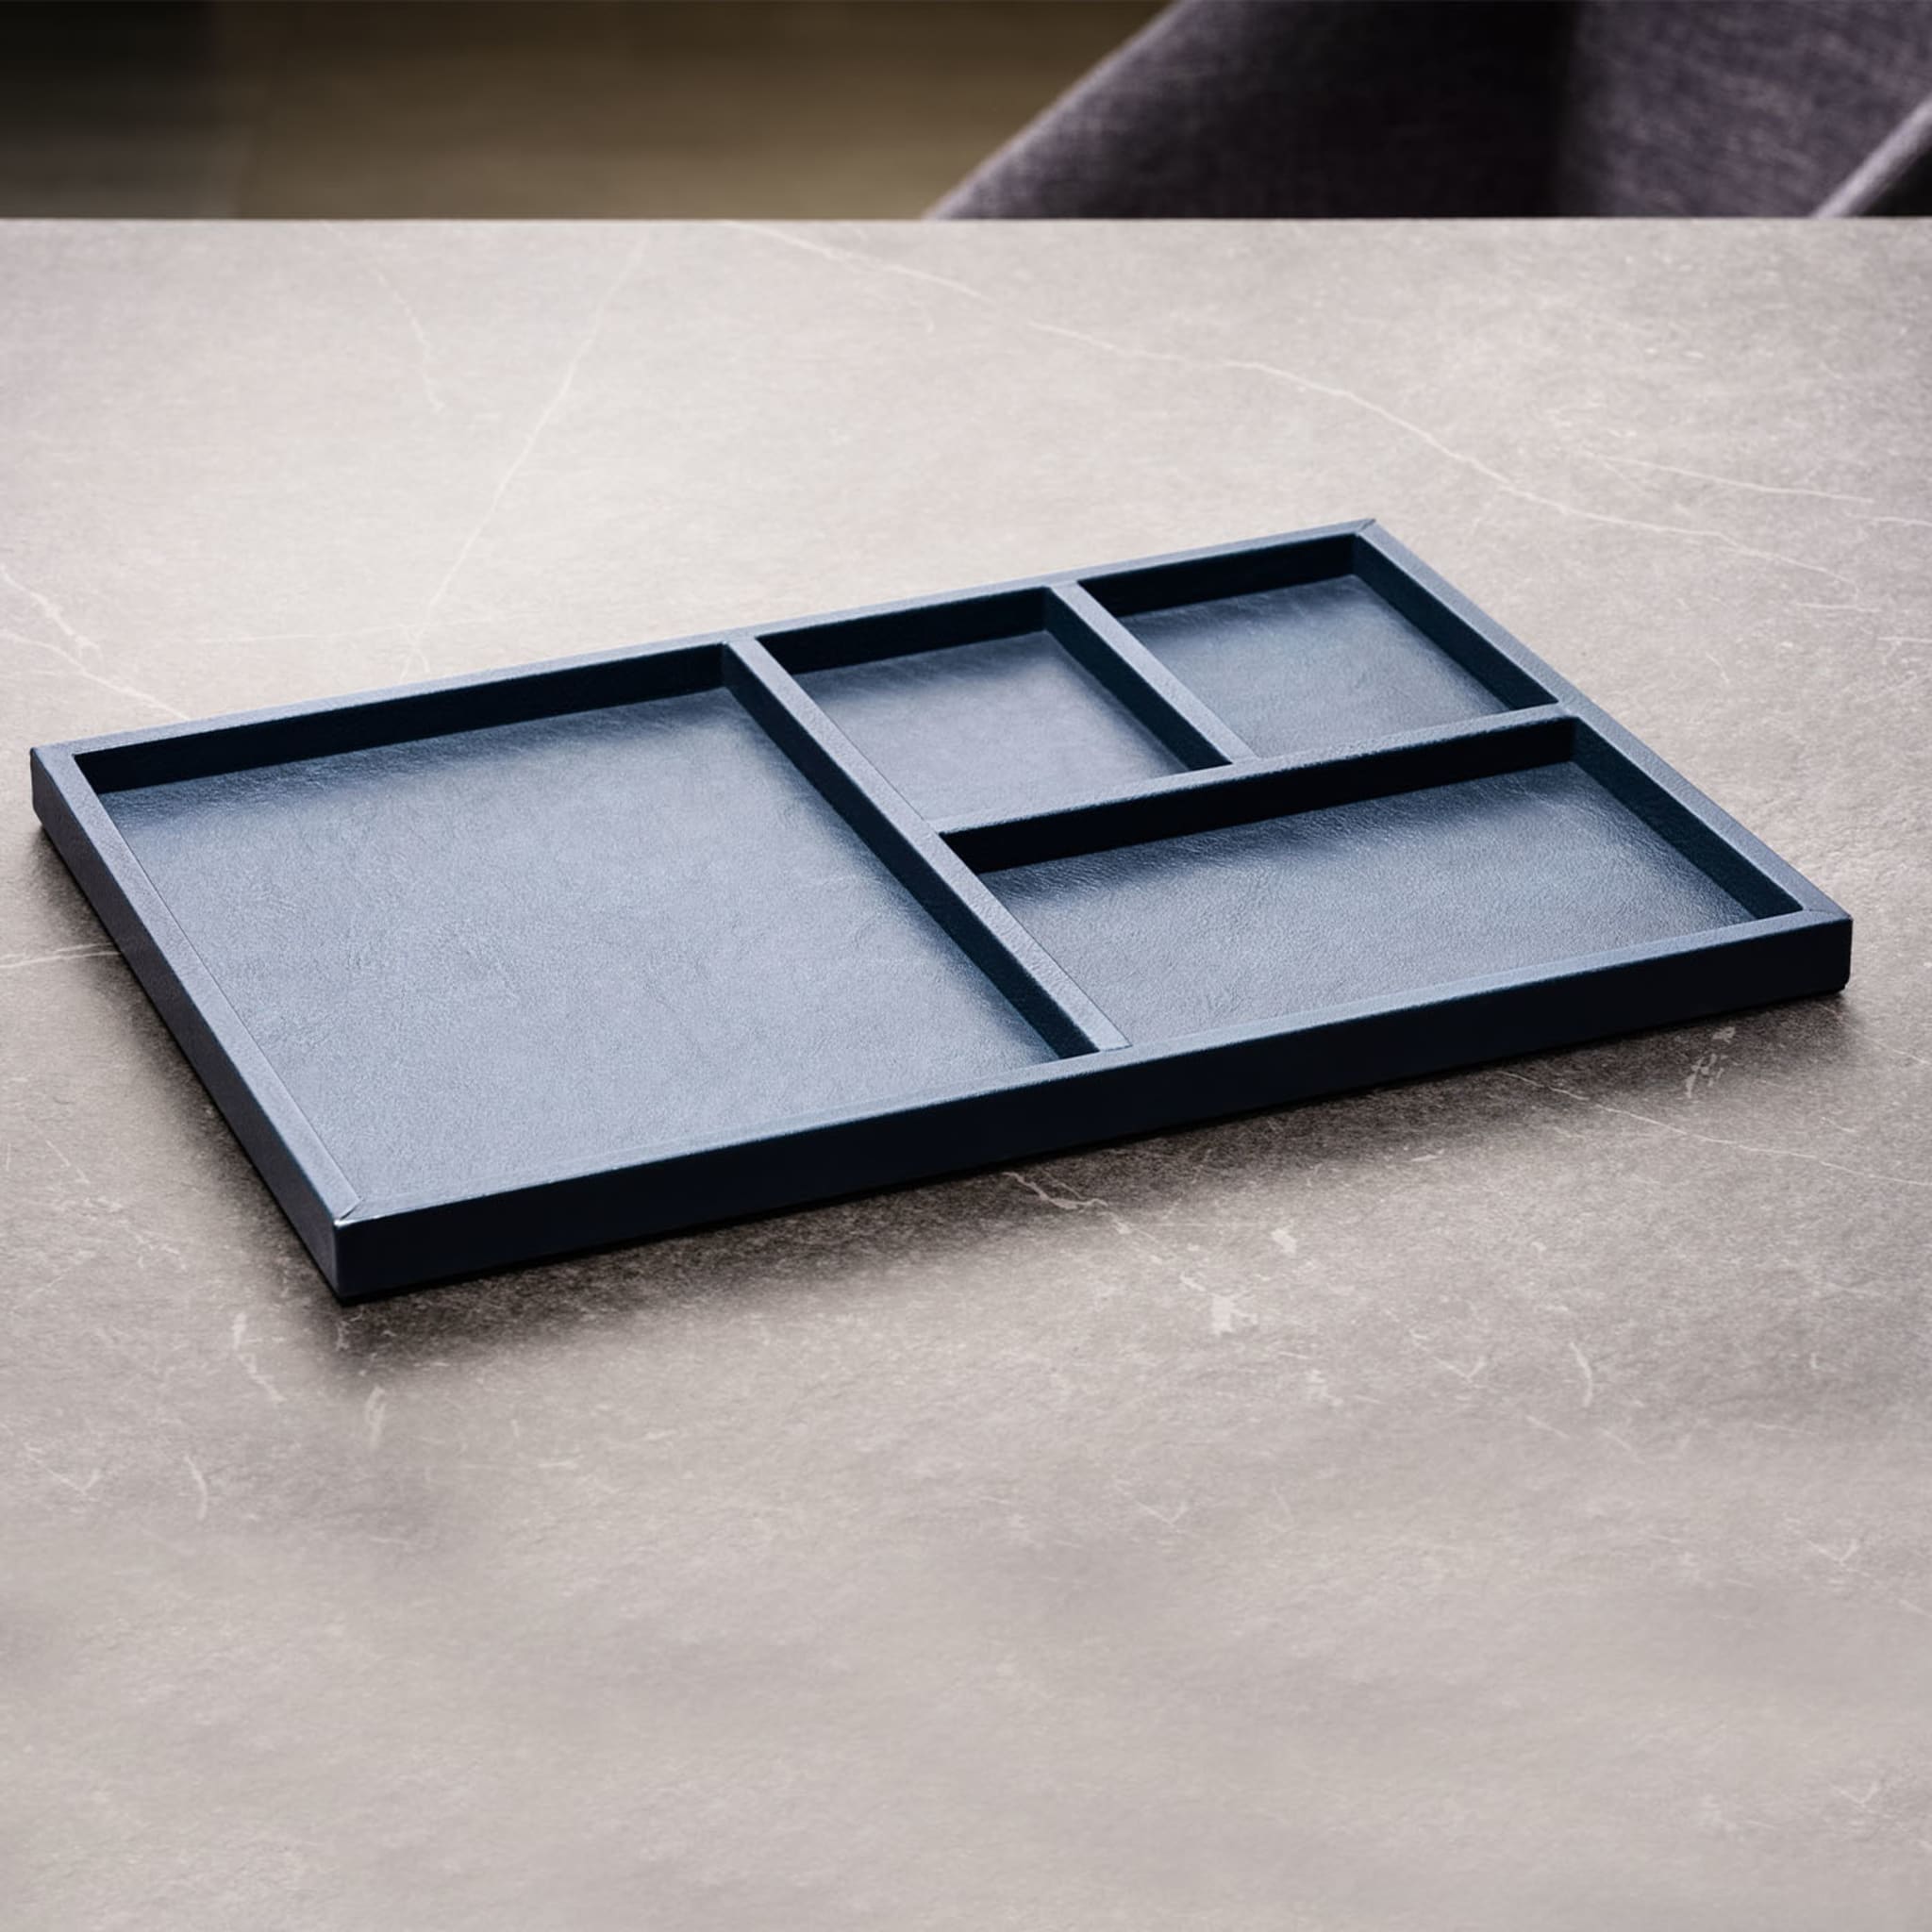 Blue Leather Canteen Tray 01 by Shawn Henderson - Alternative view 2